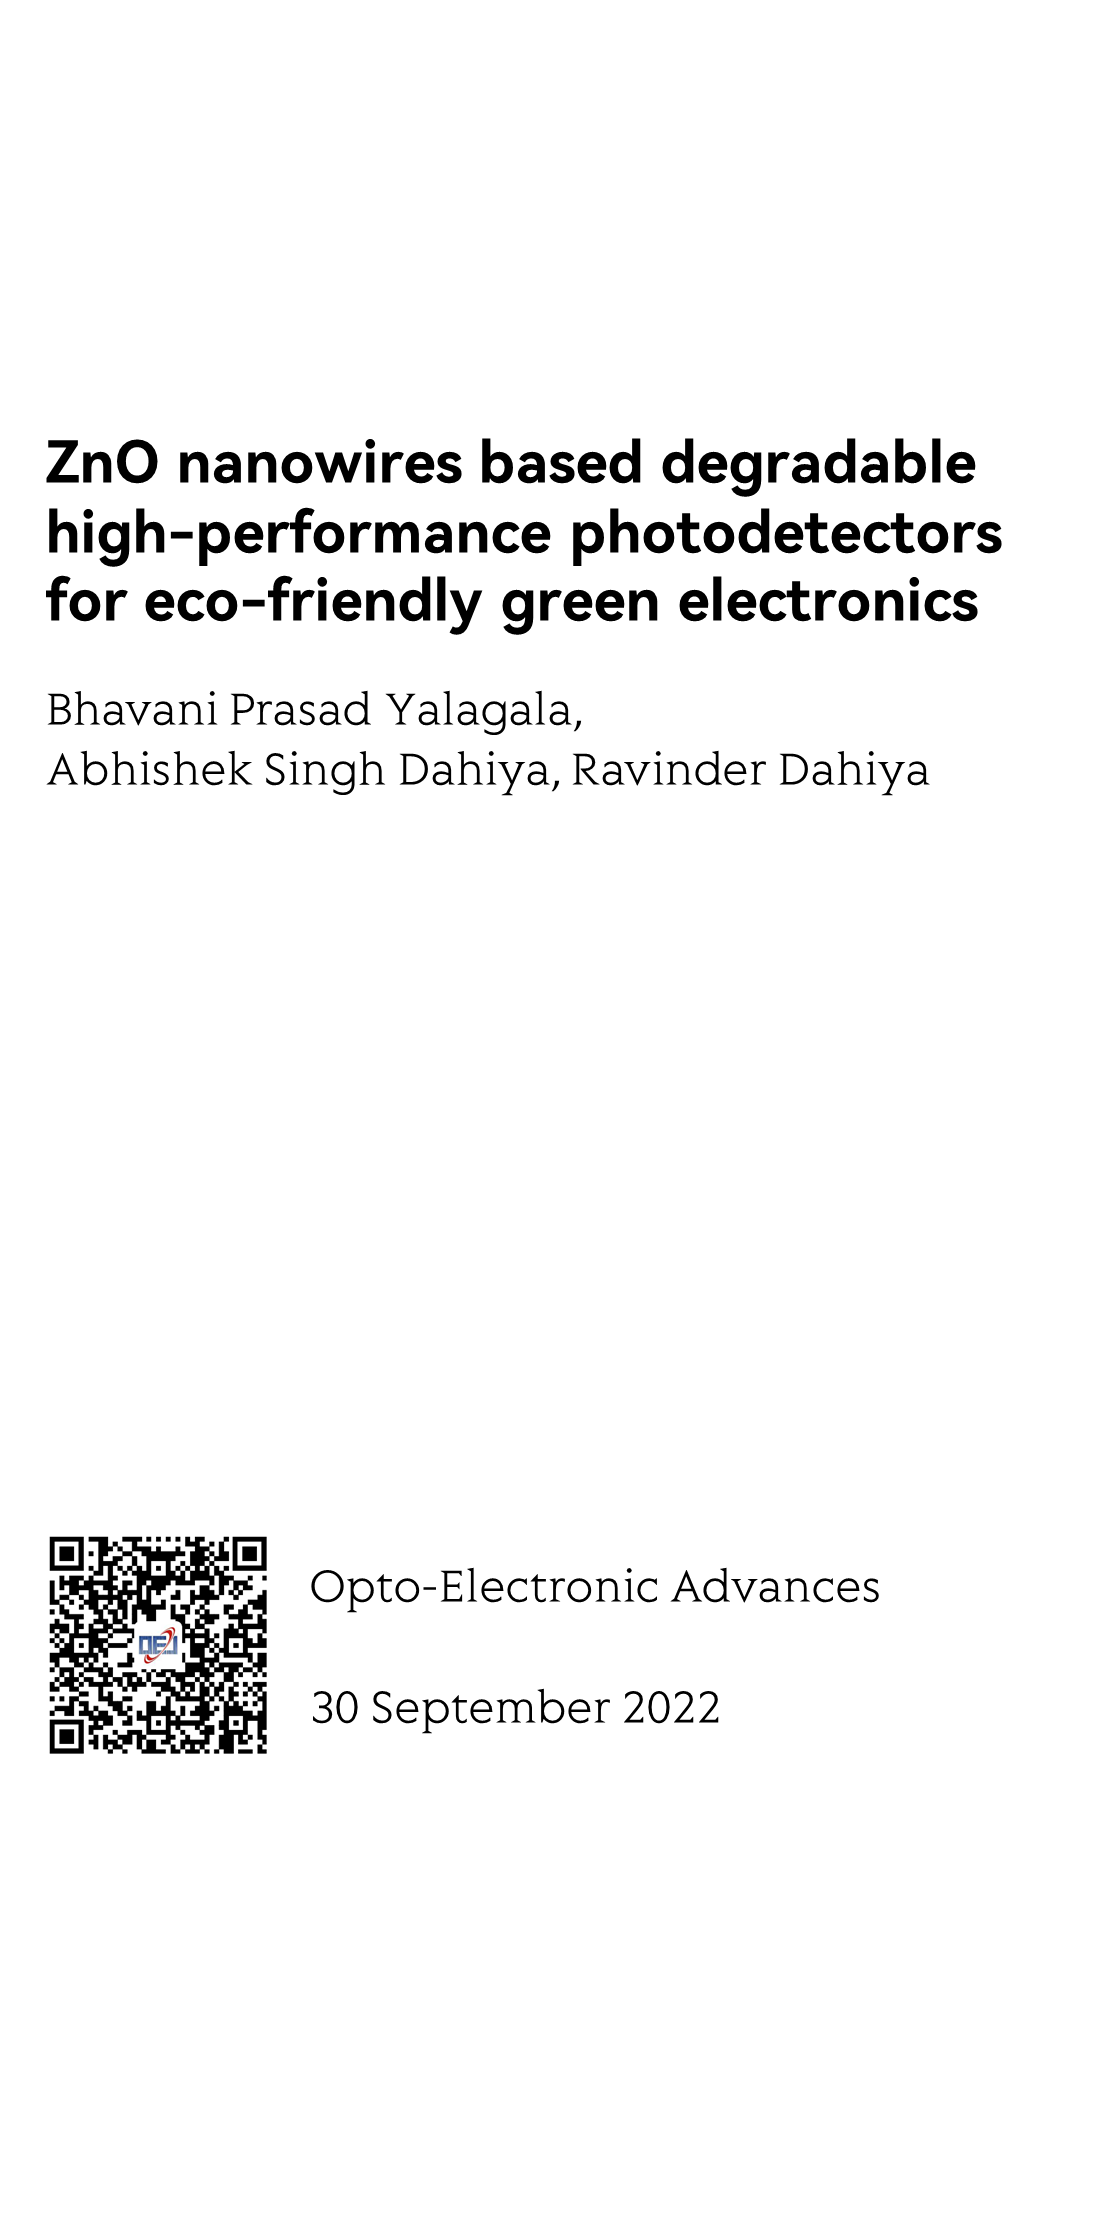 ZnO nanowires based degradable high-performance photodetectors for eco-friendly green electronics_1